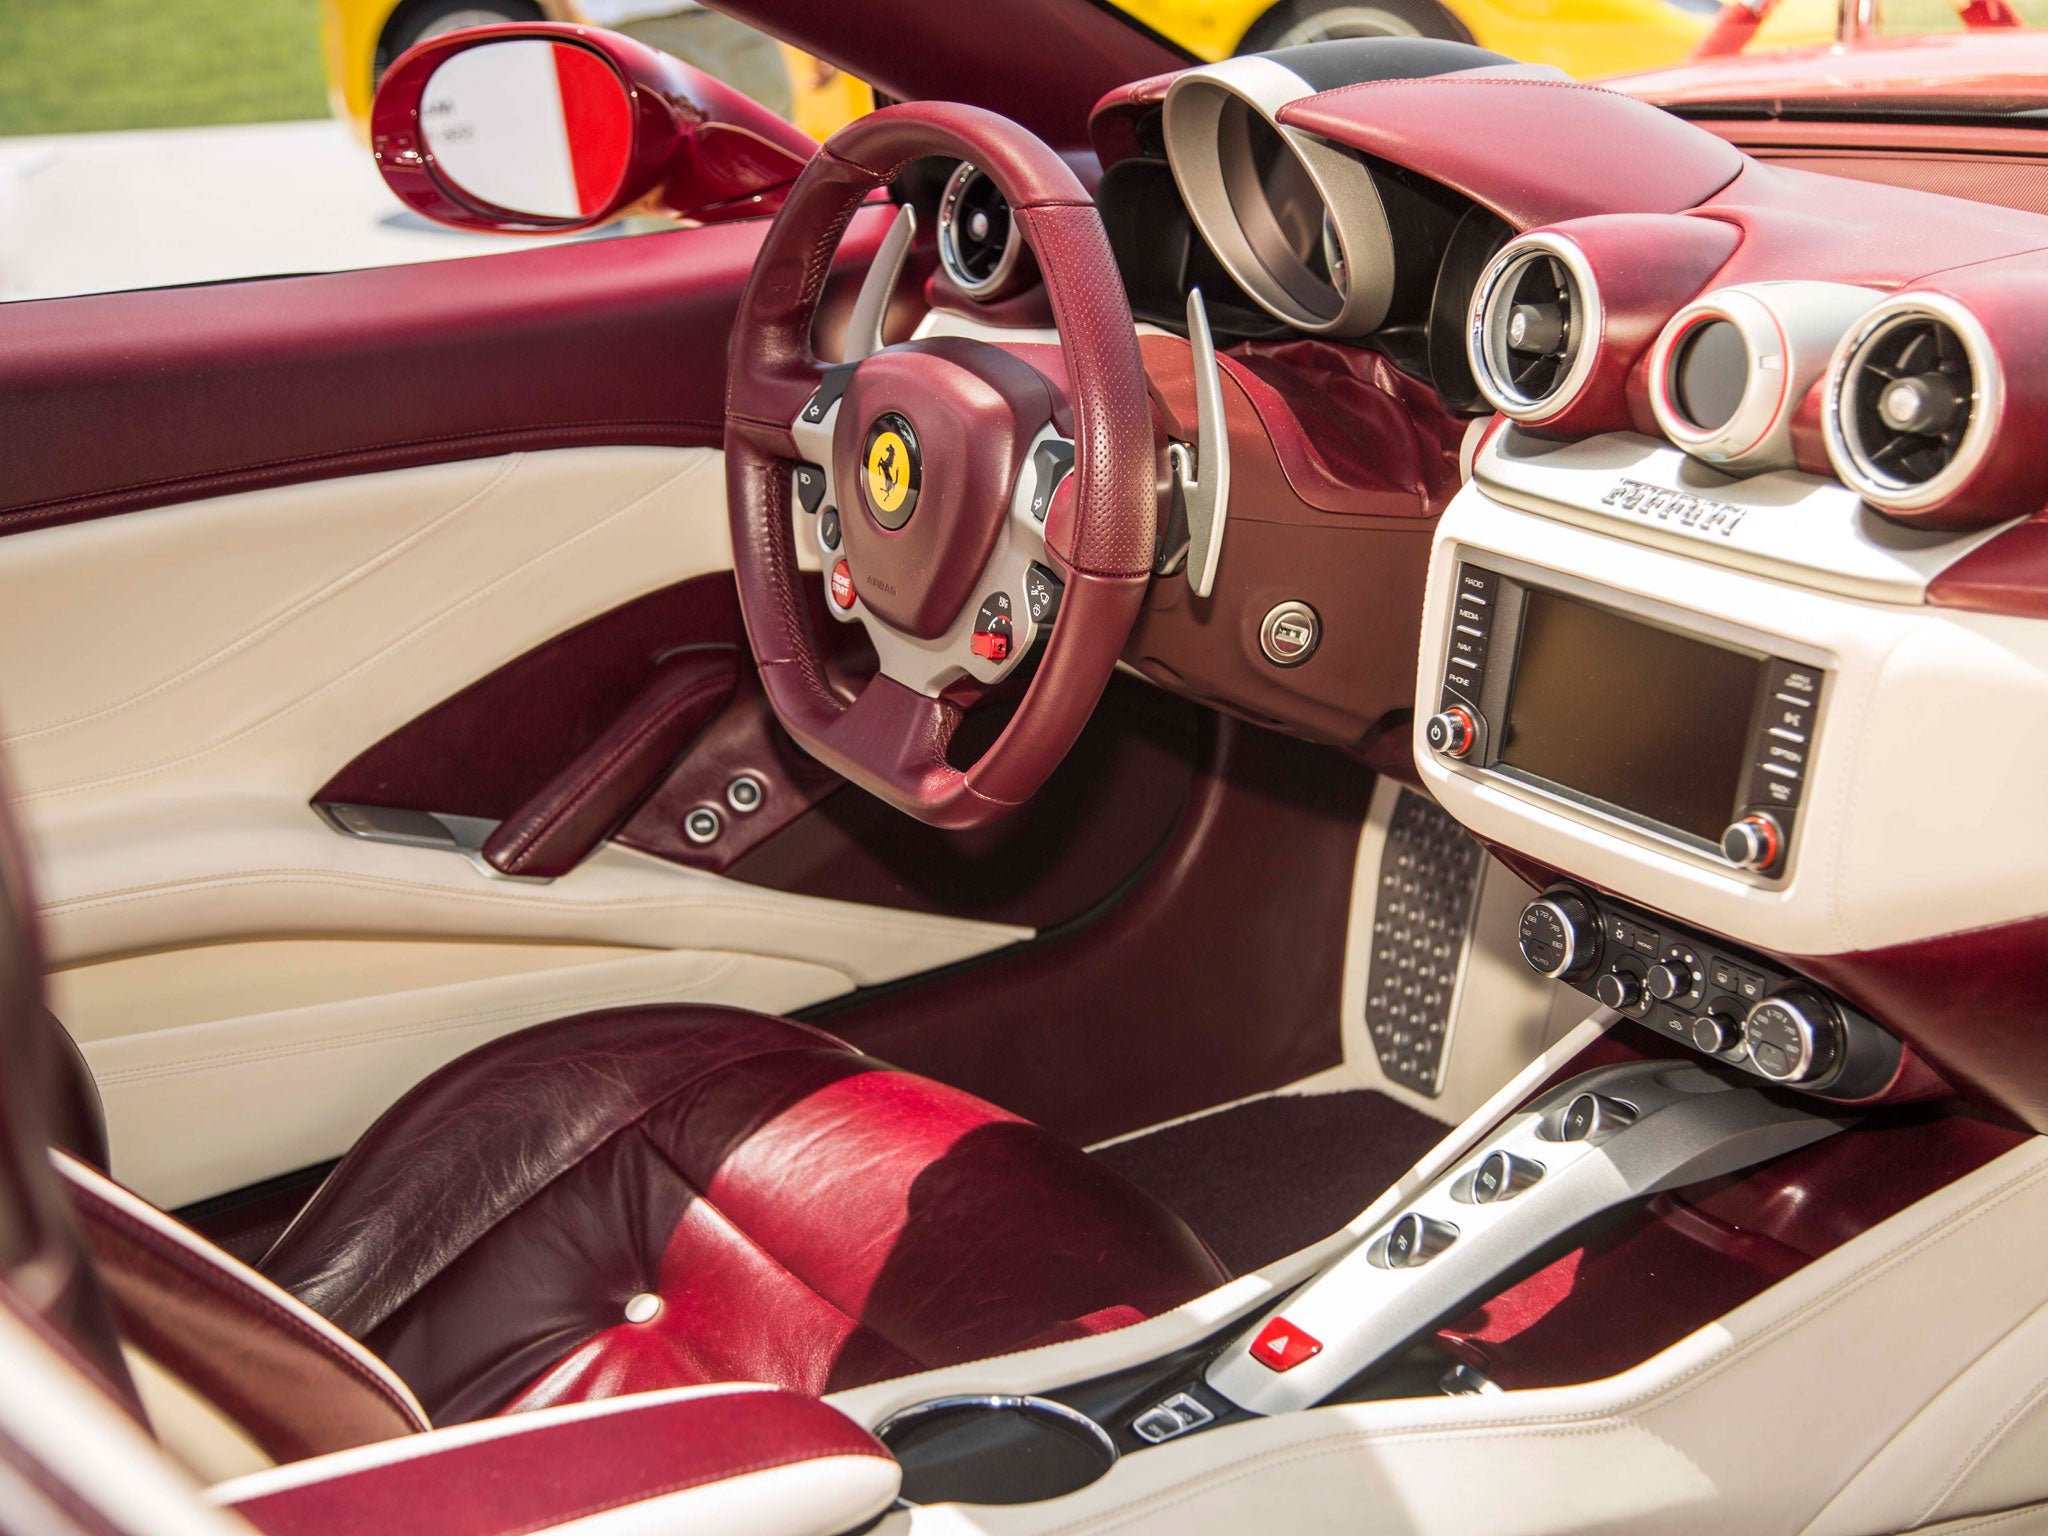 Customised interiors are all part of the exclusive Ferrari ‘experience’ at the company’s headquarters in Maranello, northern Italy